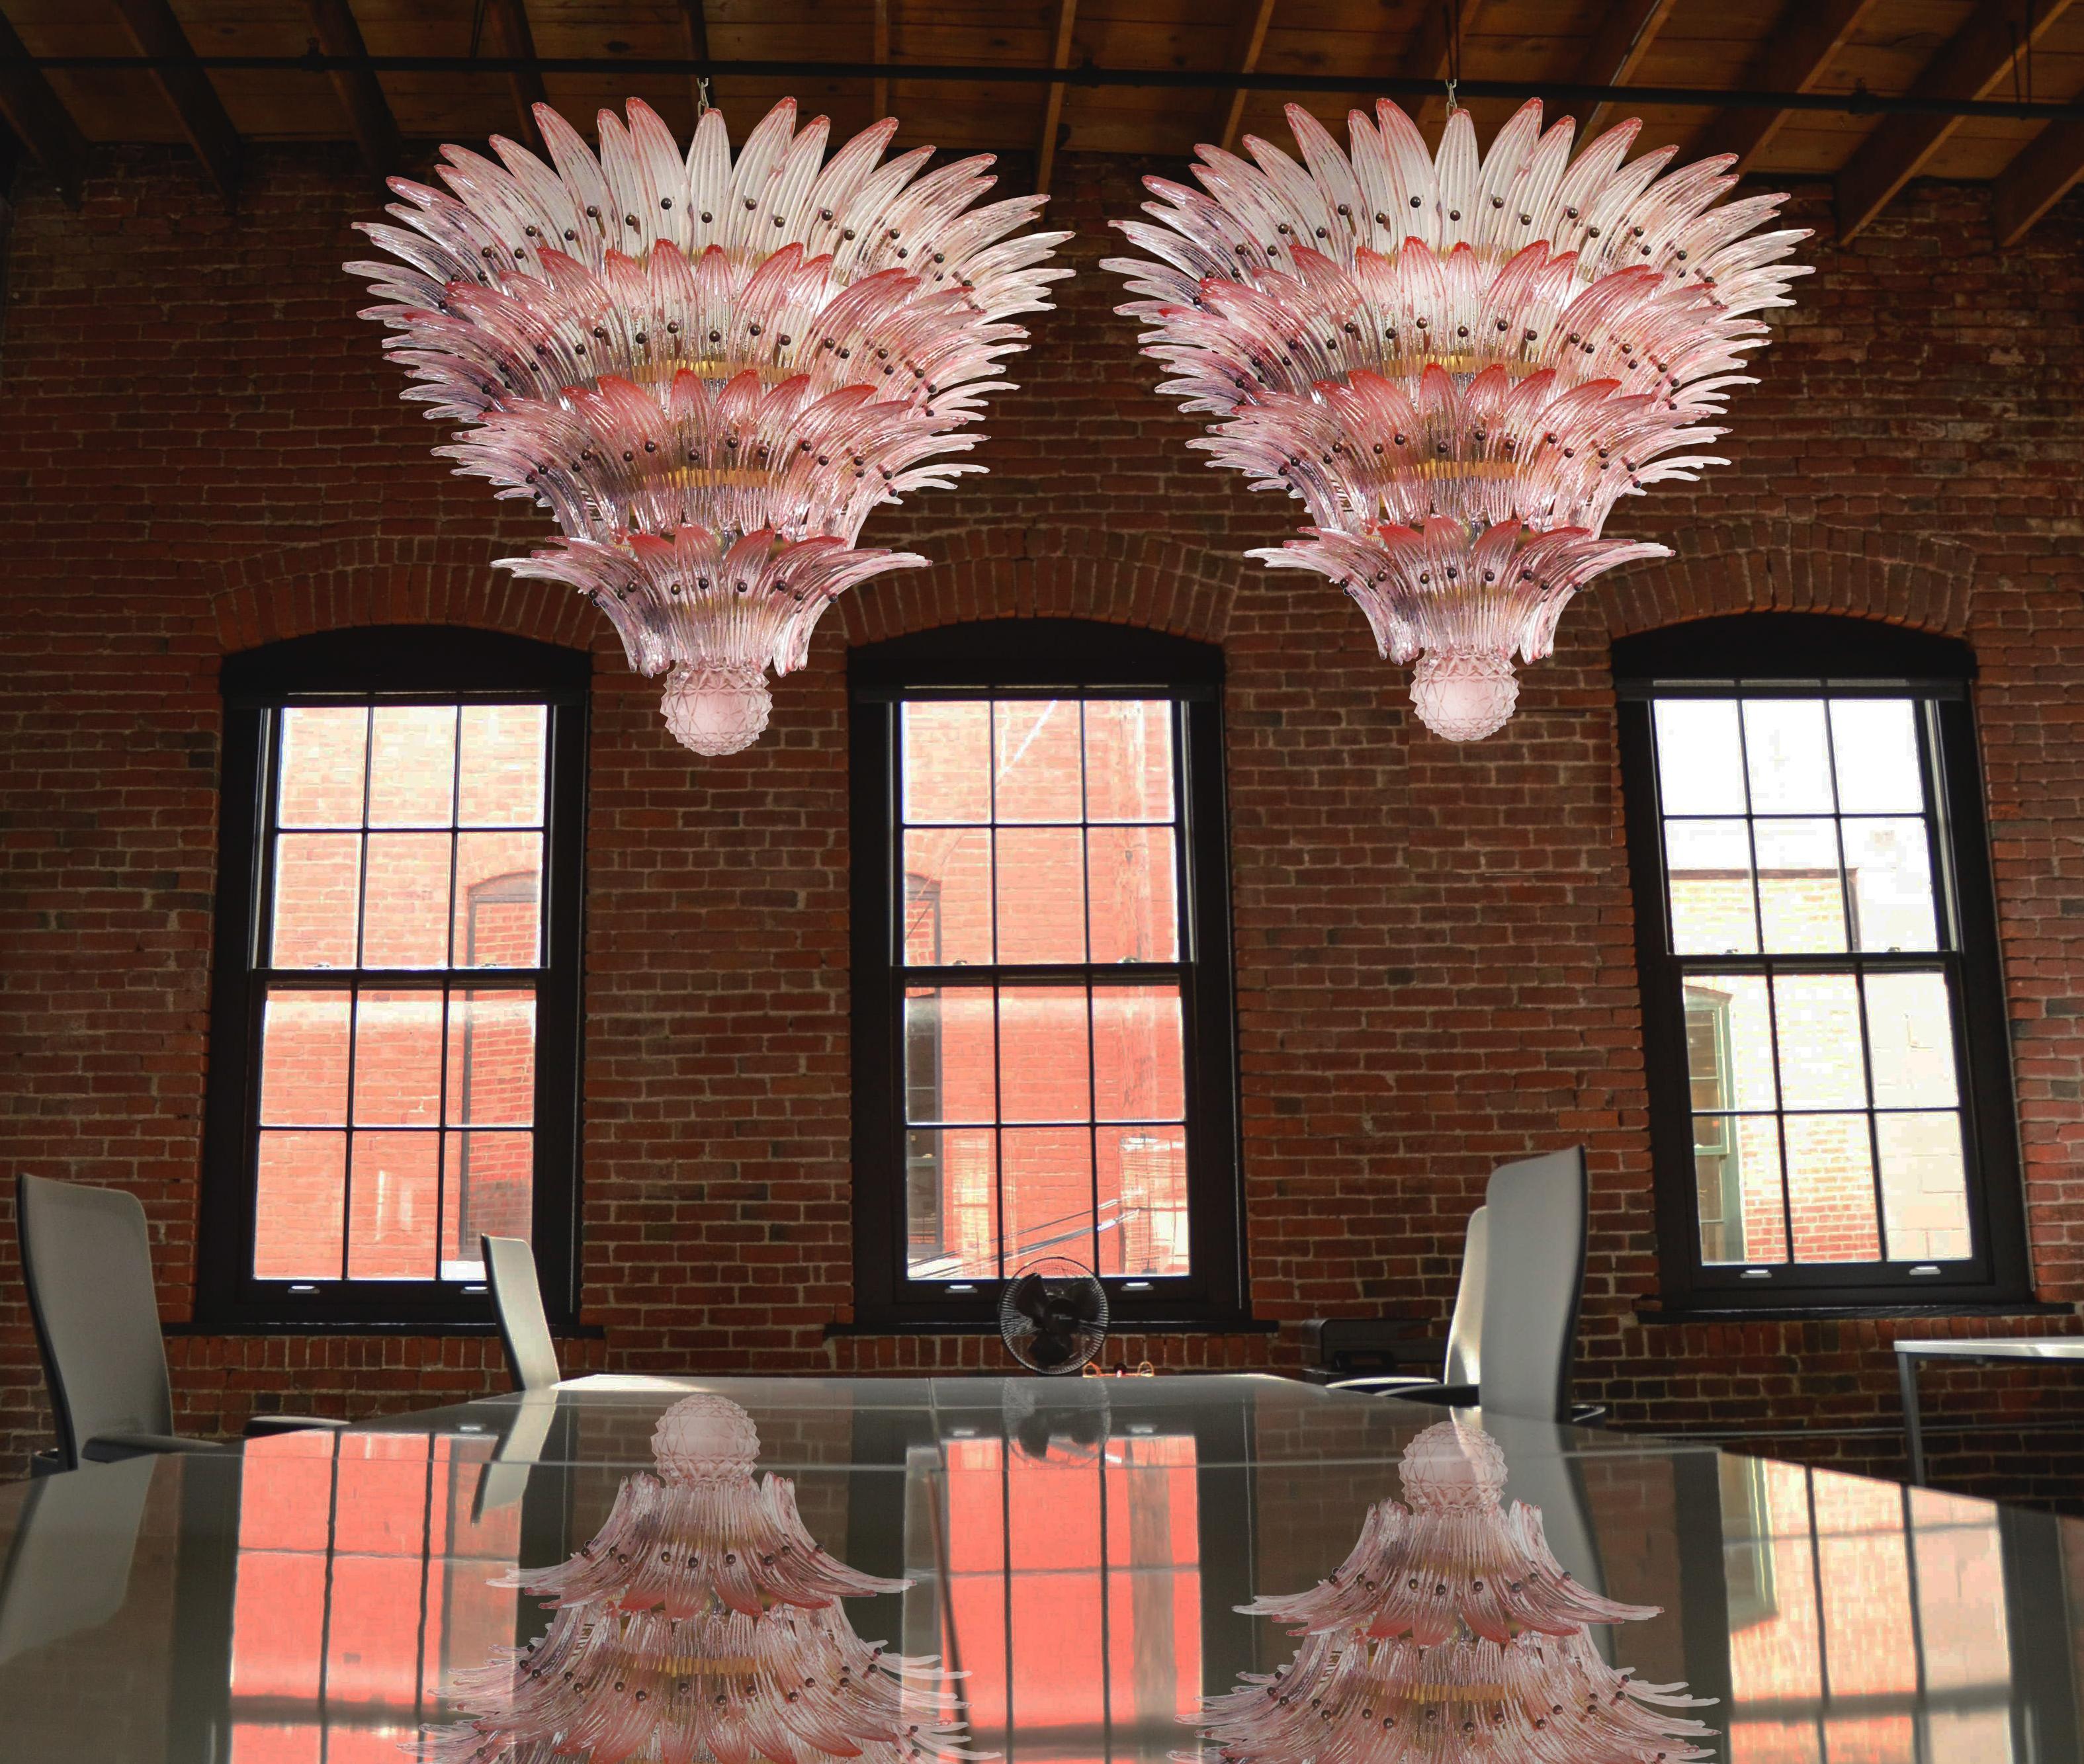 Pair of majestic chandelier ceiling lights, four levels, 163 pink glasses
Palmette ceiling light made by 163 Murano pink glasses in a gold metal frame. Murano blown glass in a traditional way. Structure in gold colored metal.
Period: